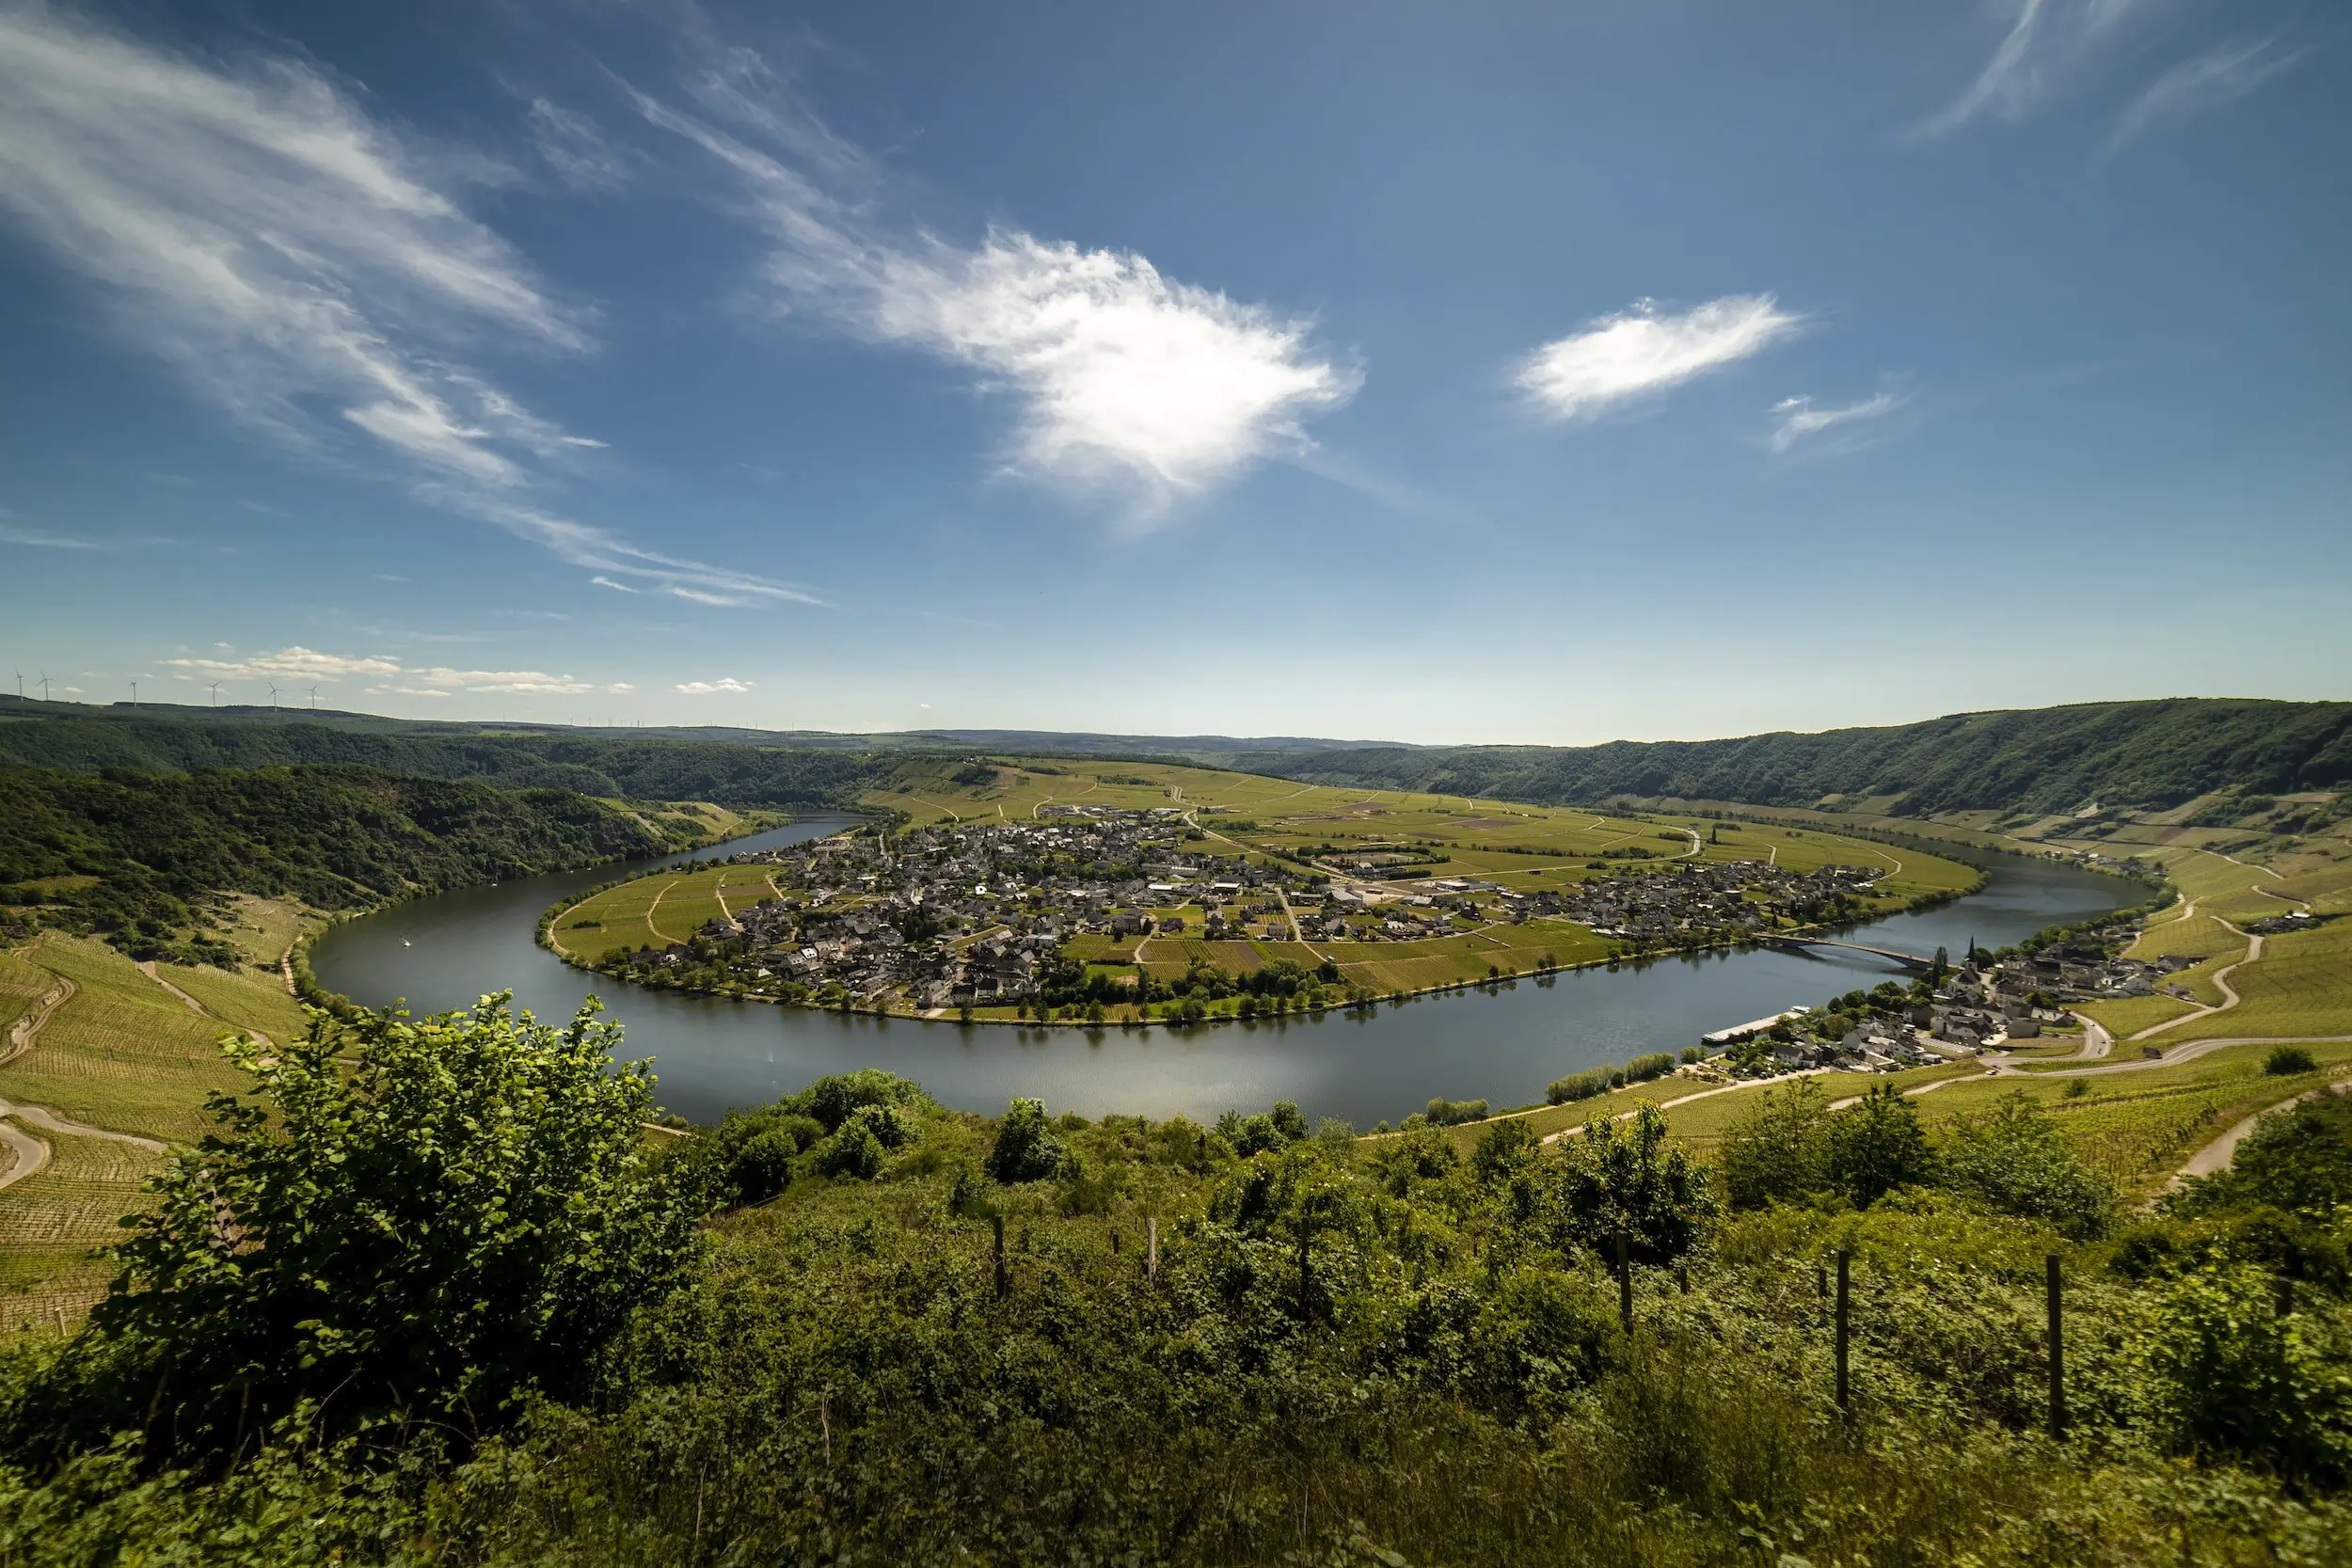 wine regions around the world - riesling and mosel - popular wine regions